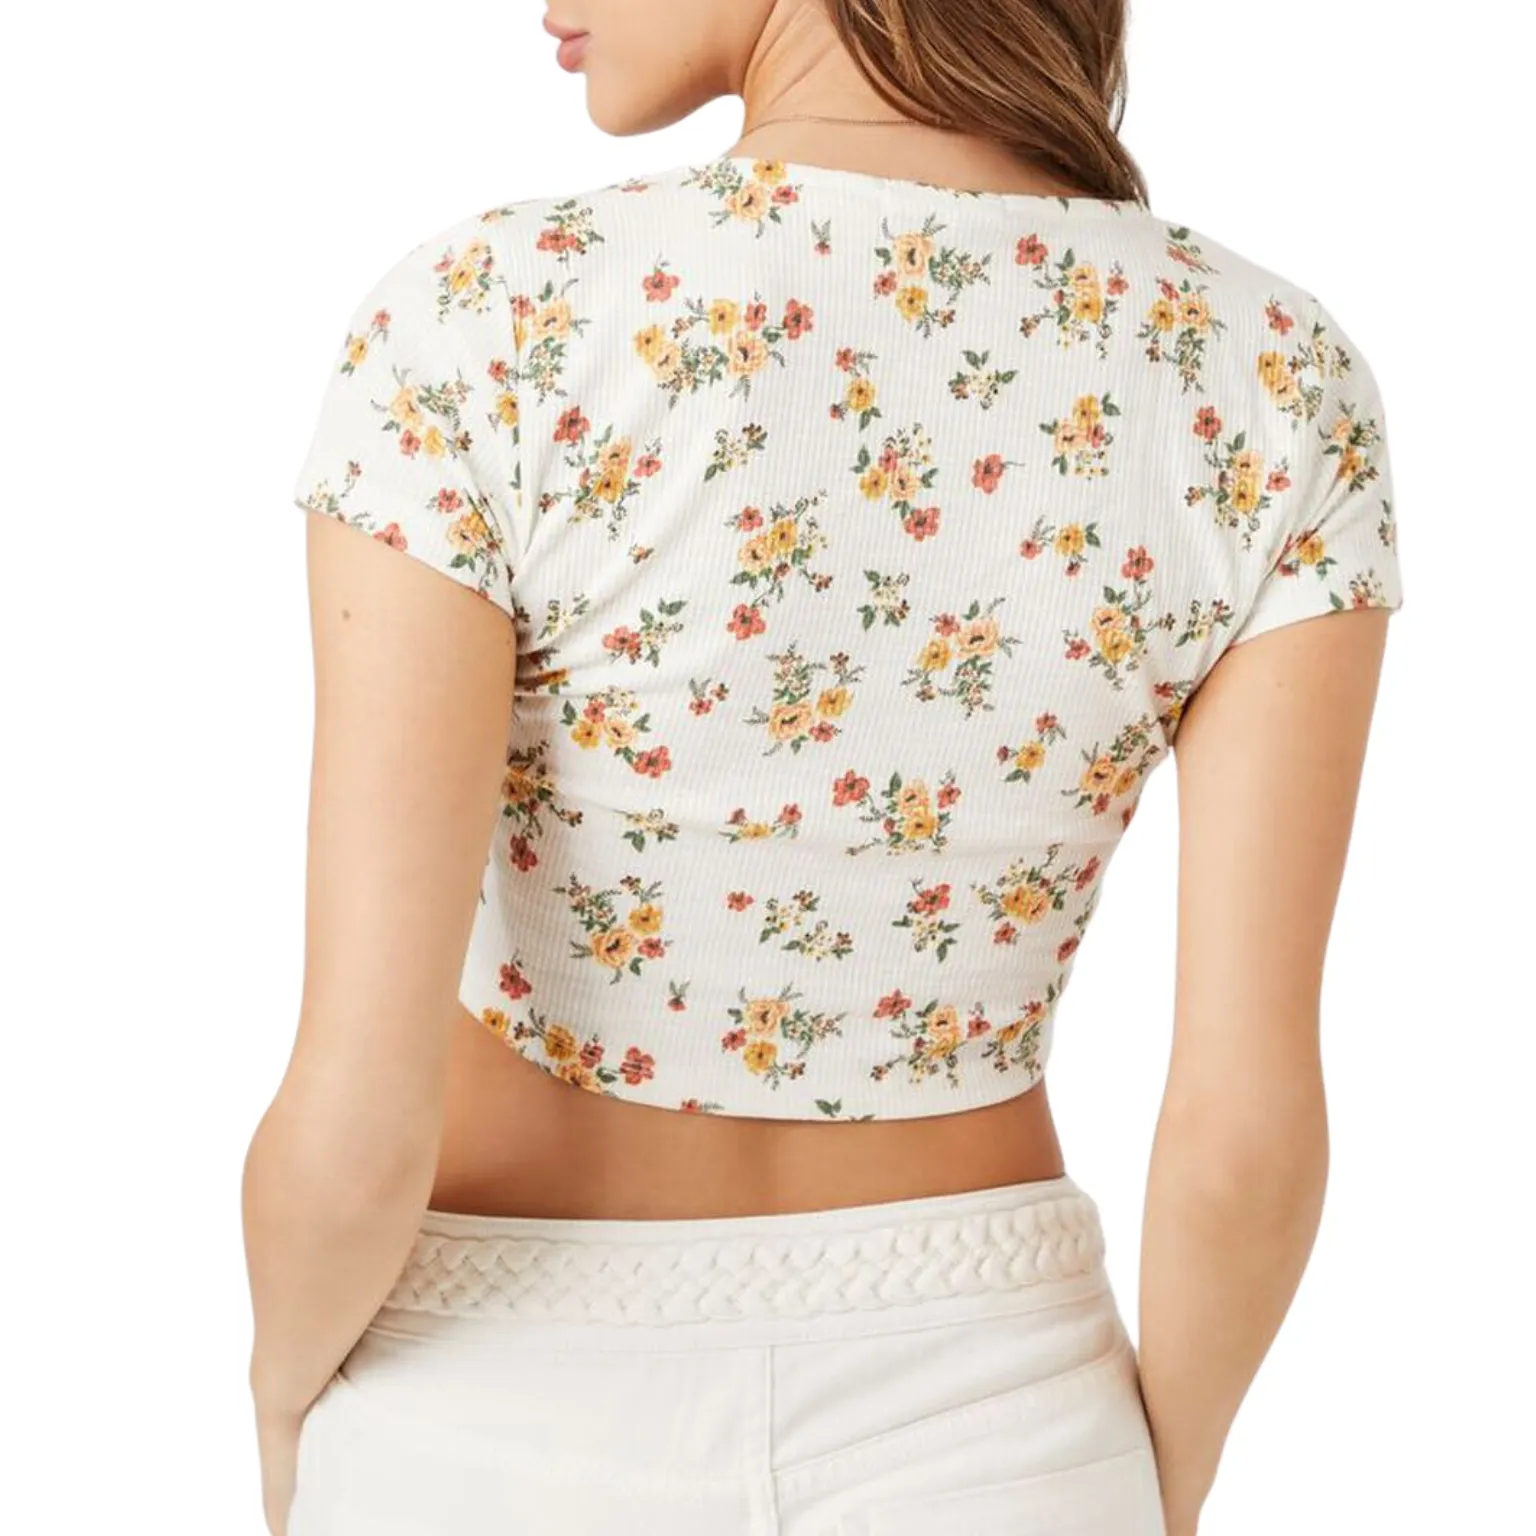 Printed Crop Top manufacturing with superior quality